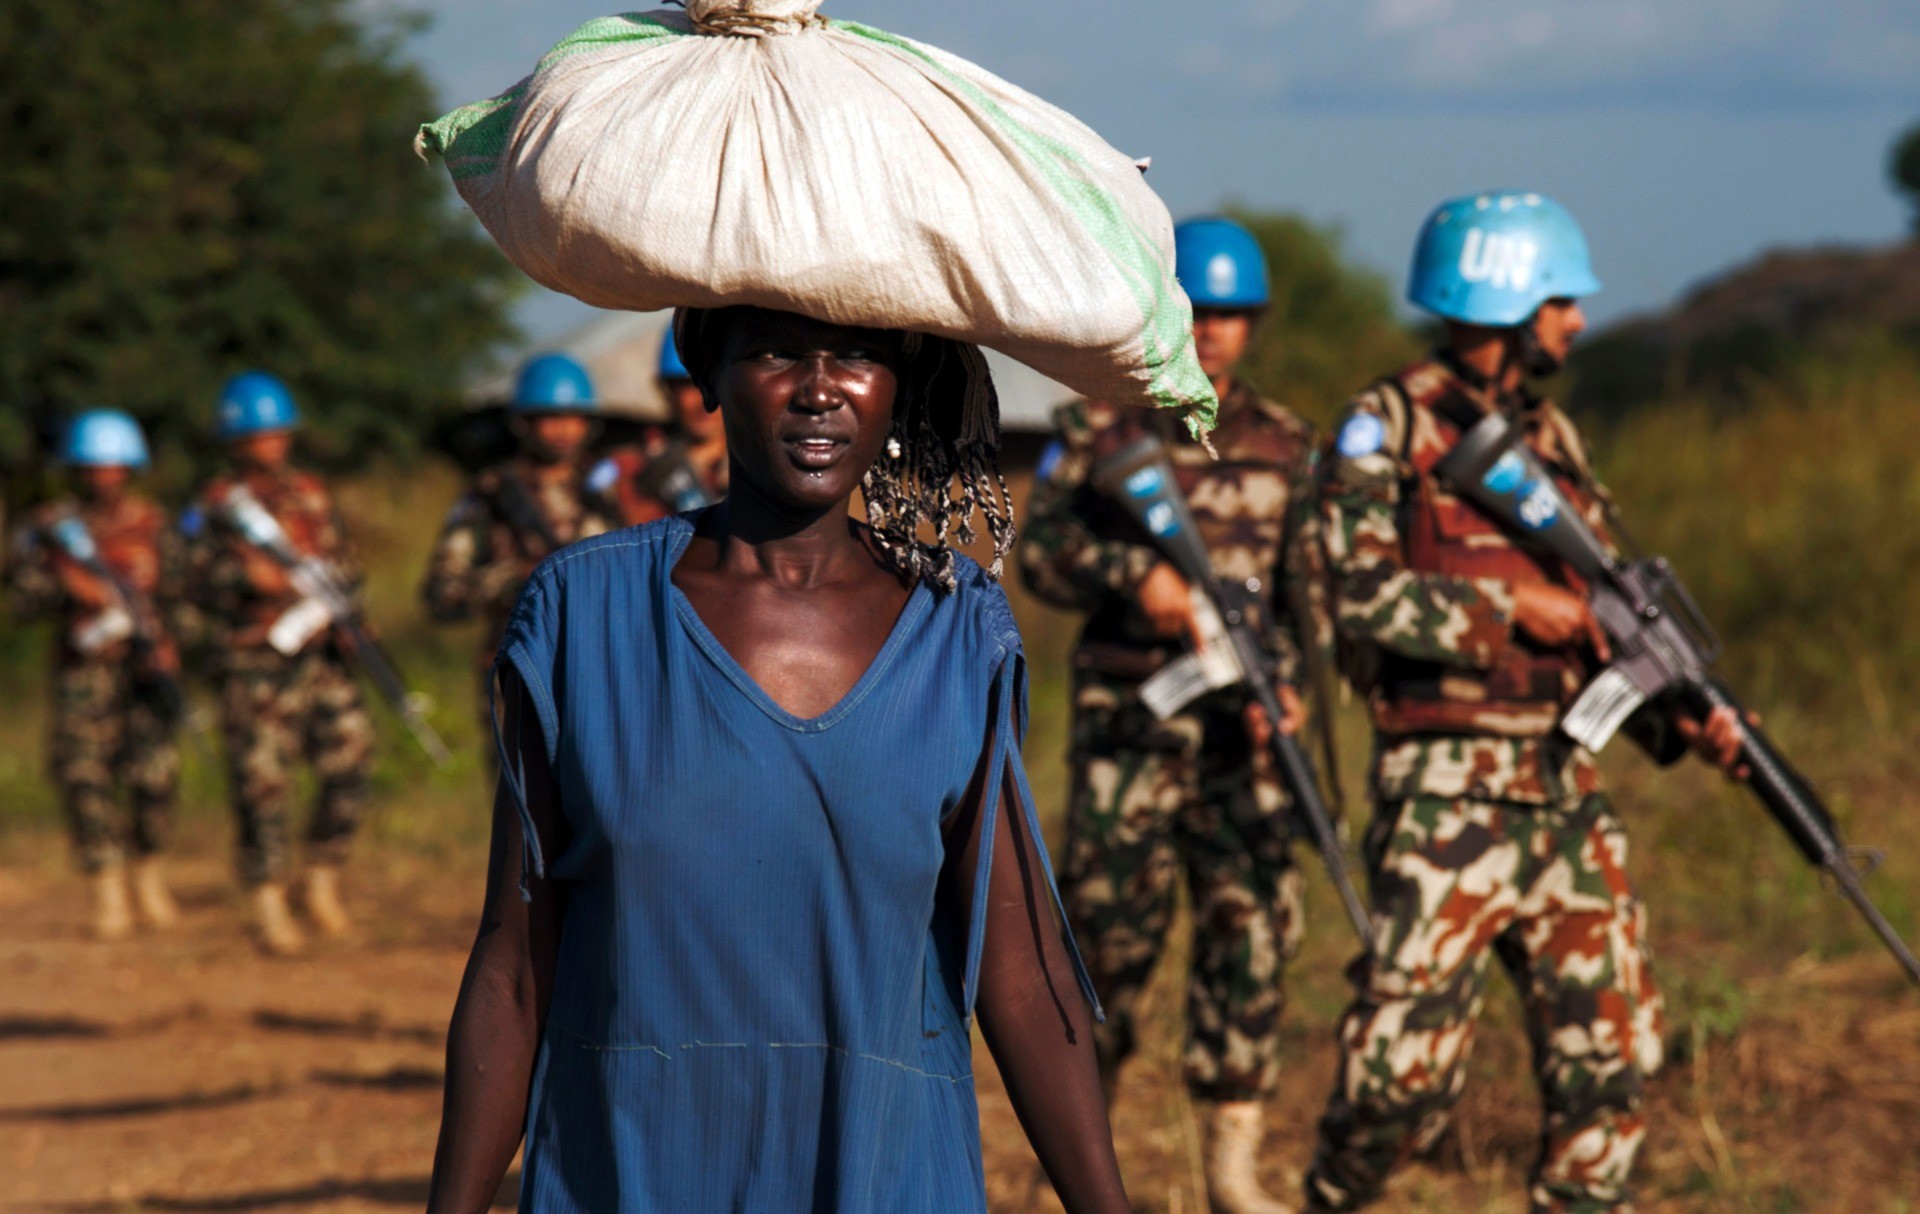 TOPSHOT - A displaced woman carries goods as United Nations Mission in South Sudan (UNMISS) peacekeepers patrol outside the premises of the UN Protection of Civilians (PoC) site in Juba on October 4, 2016. According to the UN, due to the increase of sexual violence outside the PoC, UNMISS has intensified its patrols in and around the protection sites, as well as in the wider Juba city area, sometimes arranging special escorts for women and young girls. / AFP / ALBERT GONZALEZ FARRAN (Photo credit should read ALBERT GONZALEZ FARRAN/AFP via Getty Images)